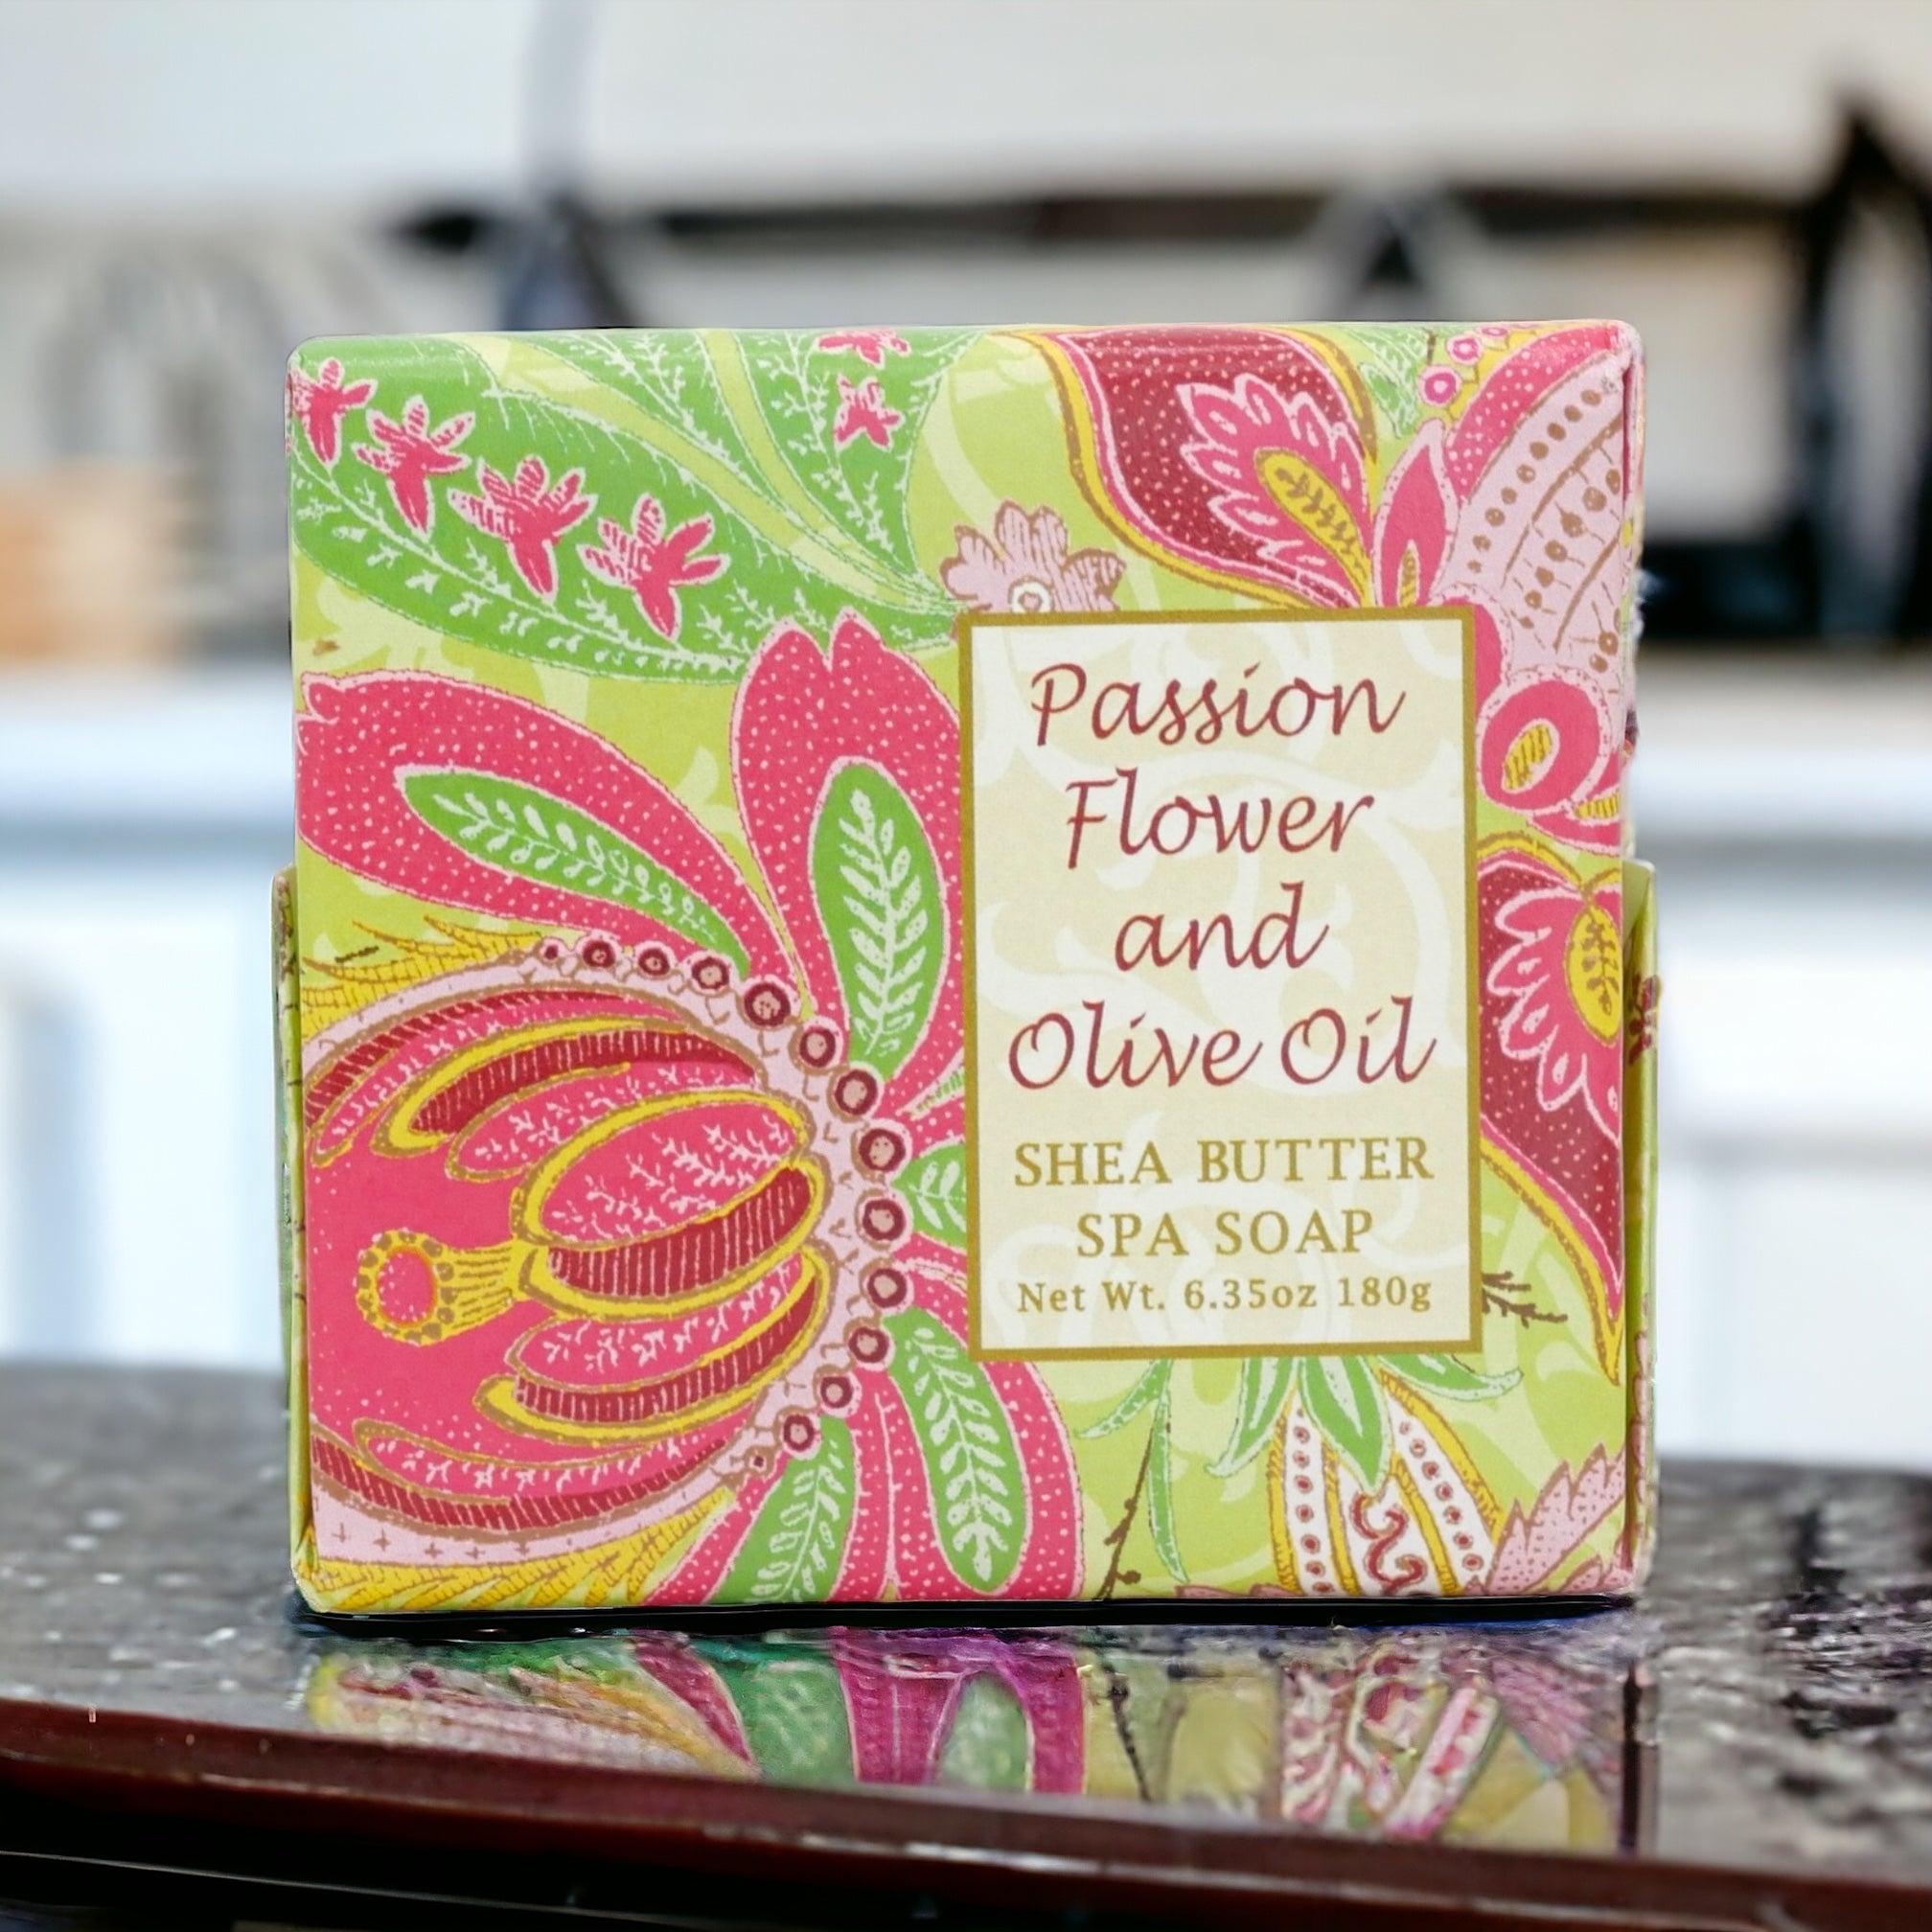 Passion Flower & Olive Oil Shea Butter Spa Soap by Greenwich Bay Trading Co.